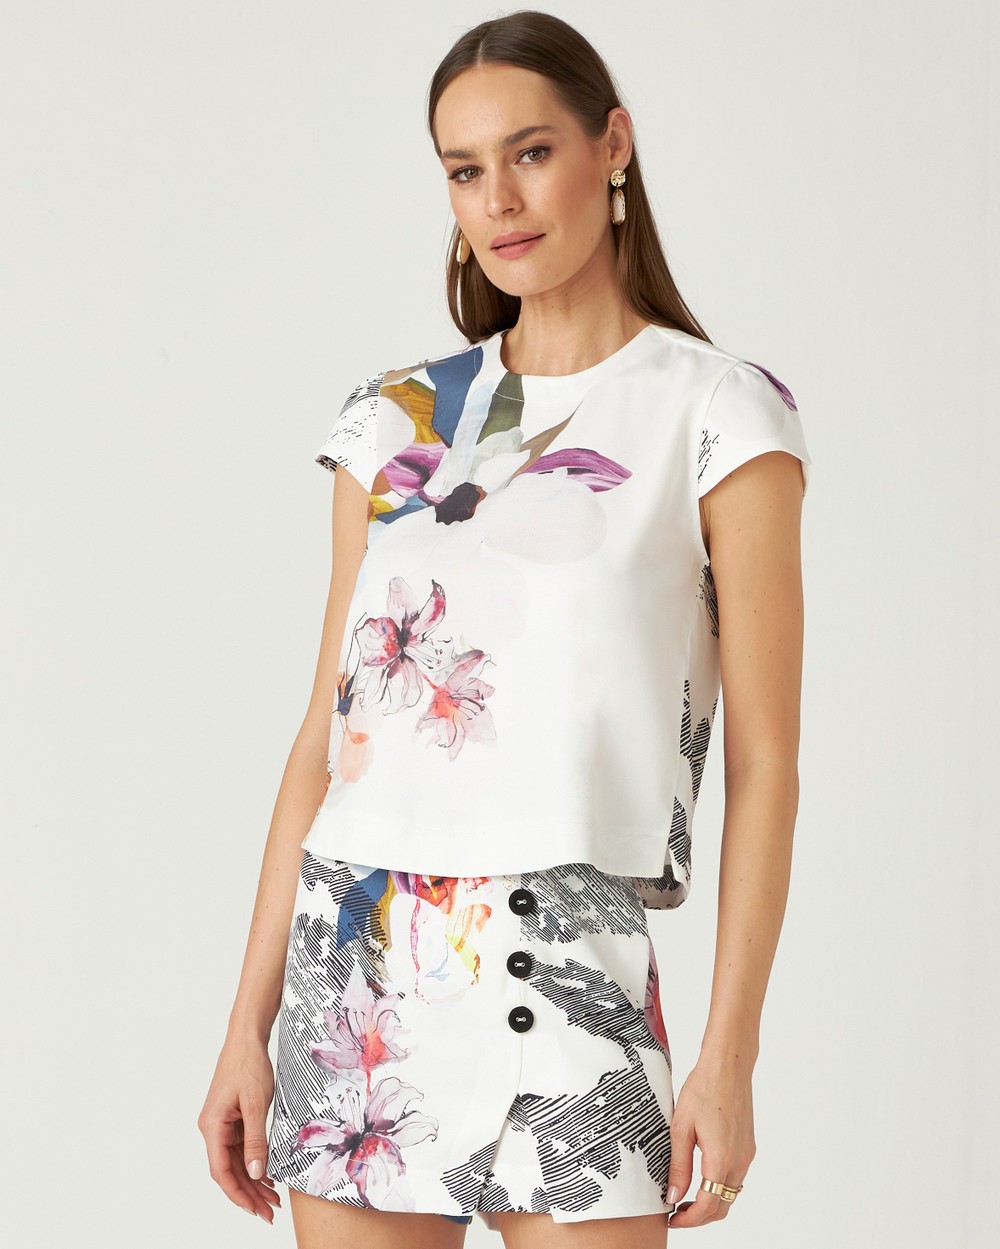 T-SHIRT CROPPED FLORAL GRÁFICO